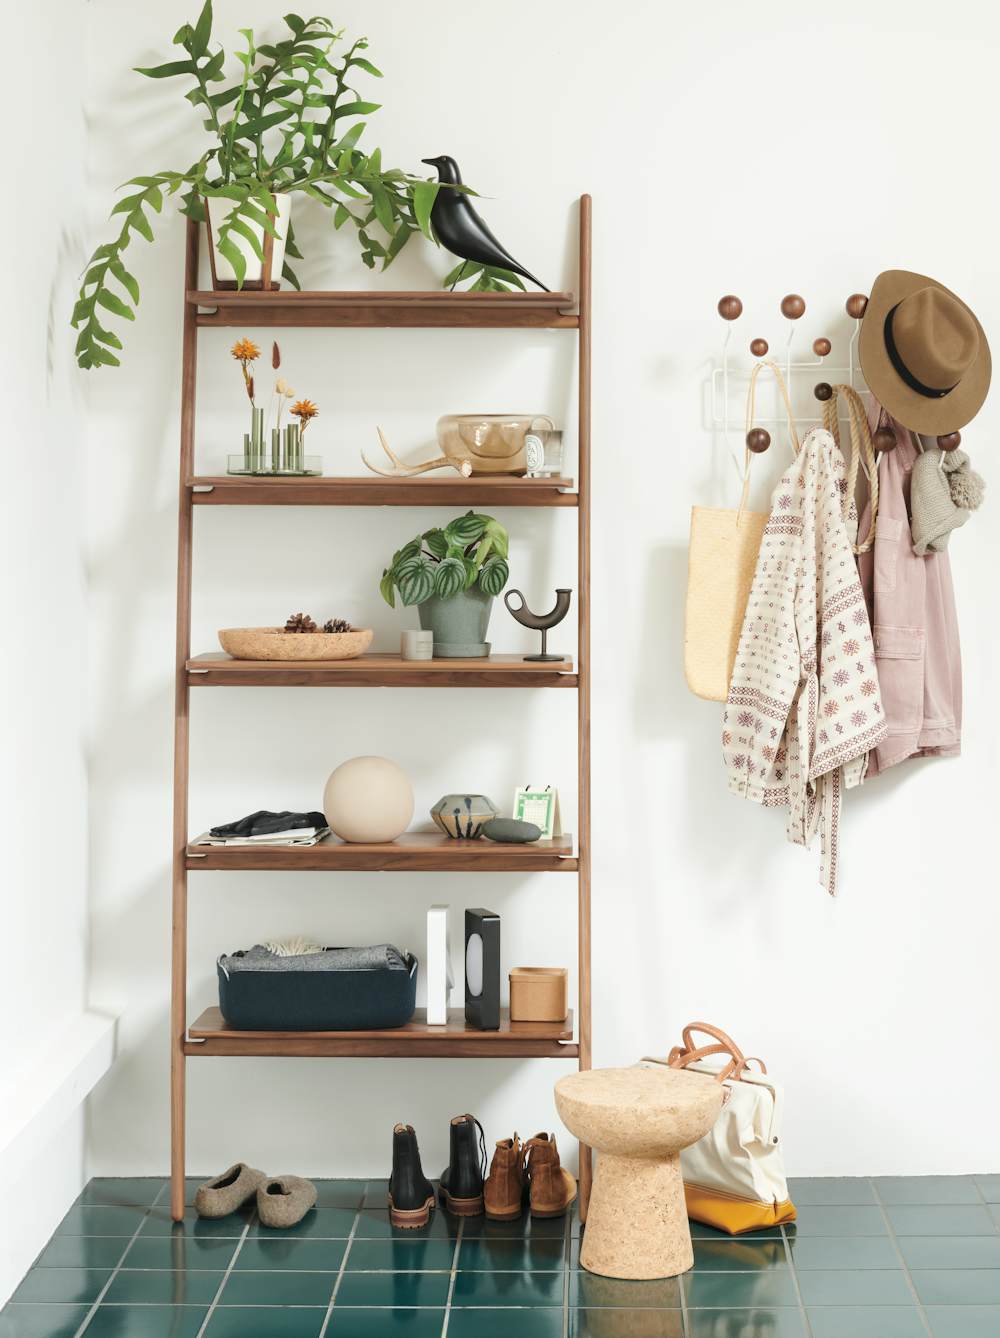 Folk Ladder Shelving in a home entryway setting